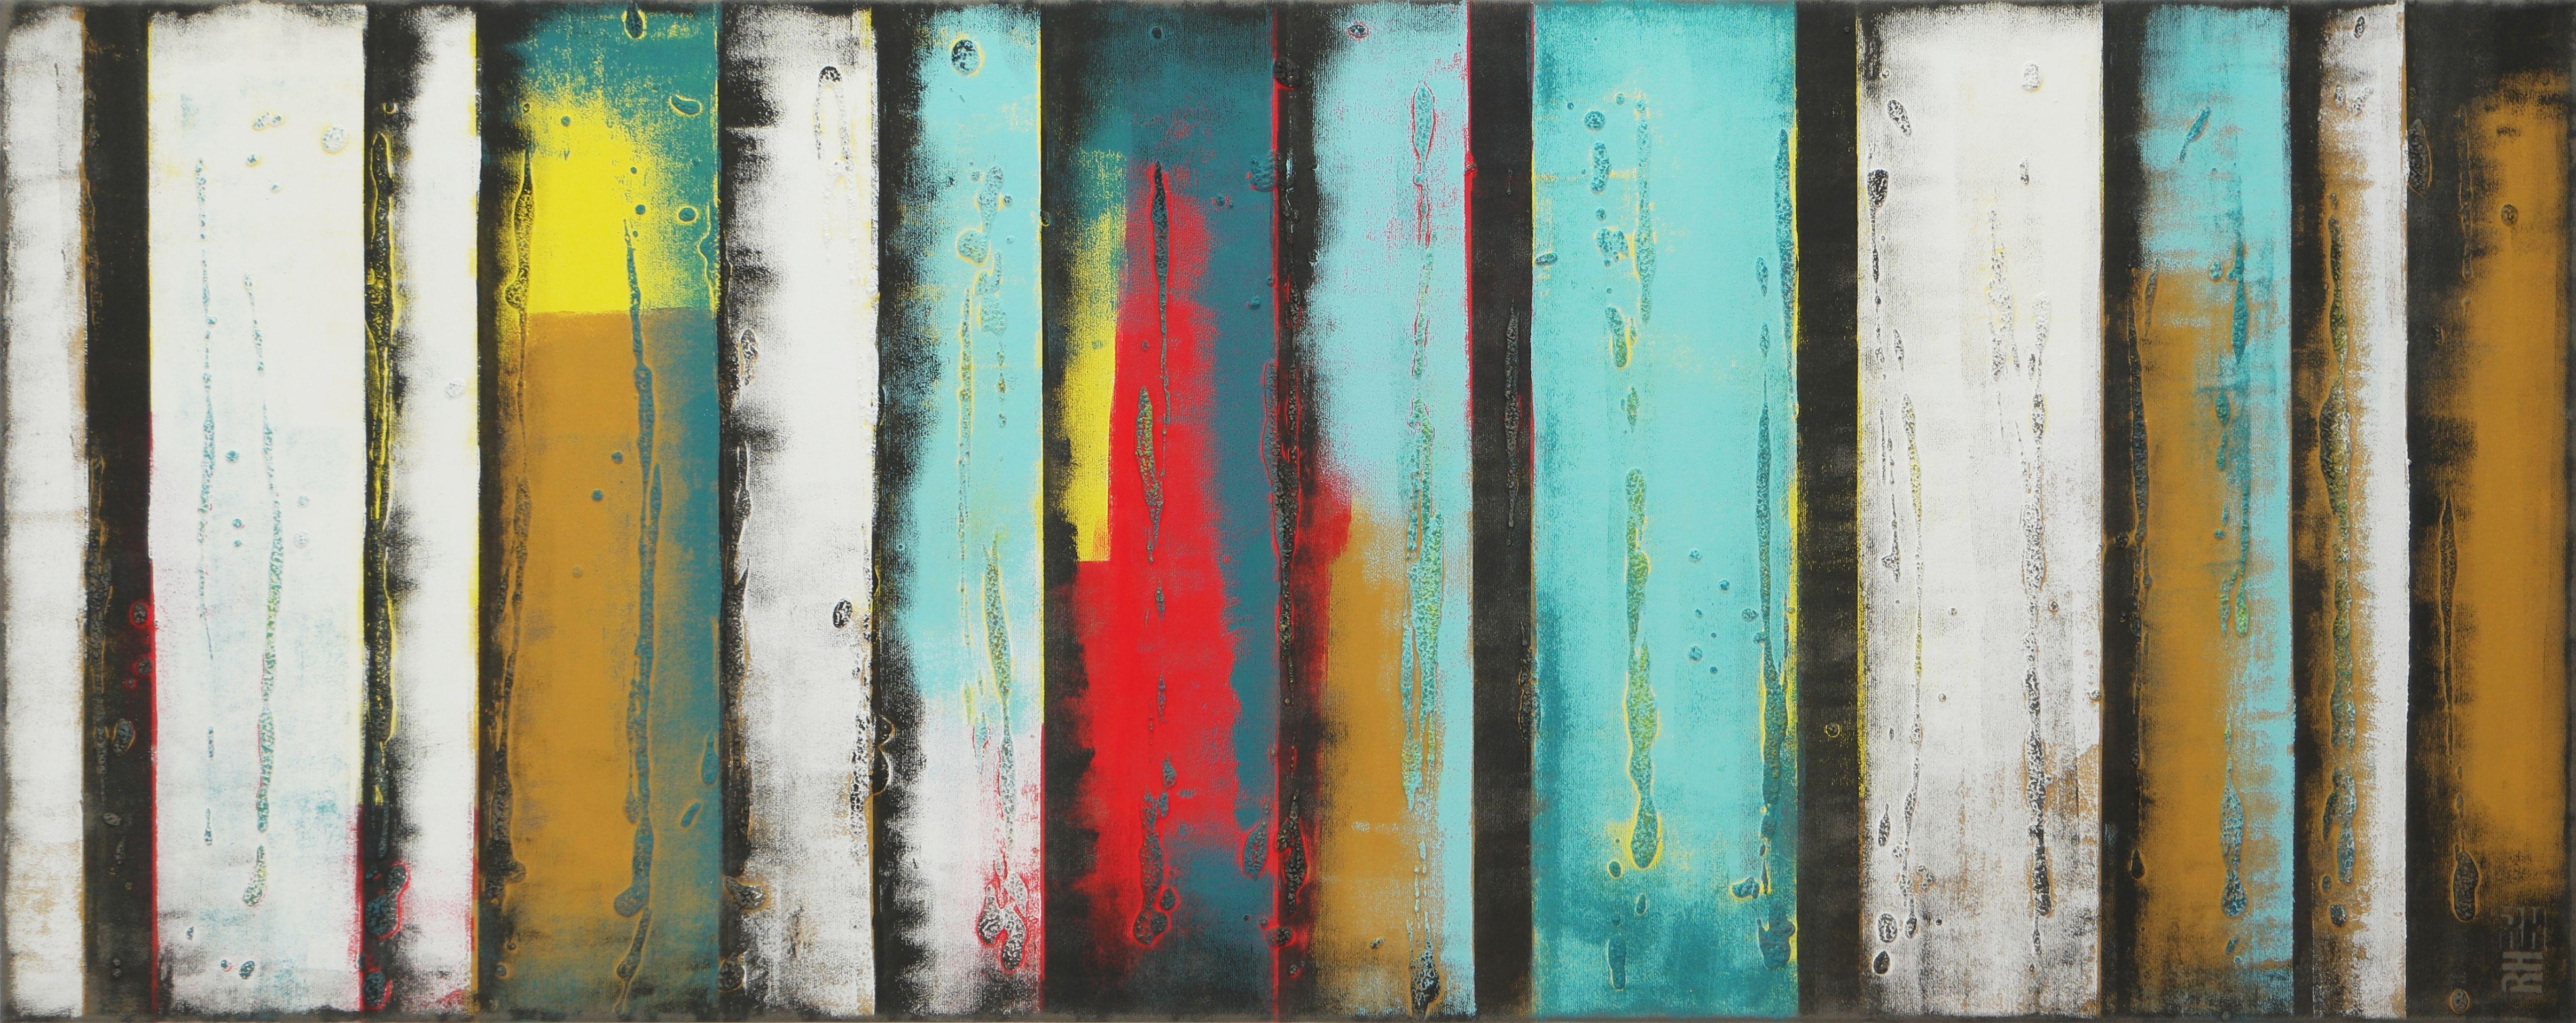 Ronald Hunter Abstract Painting - Turquoise Panels, Painting, Acrylic on Canvas